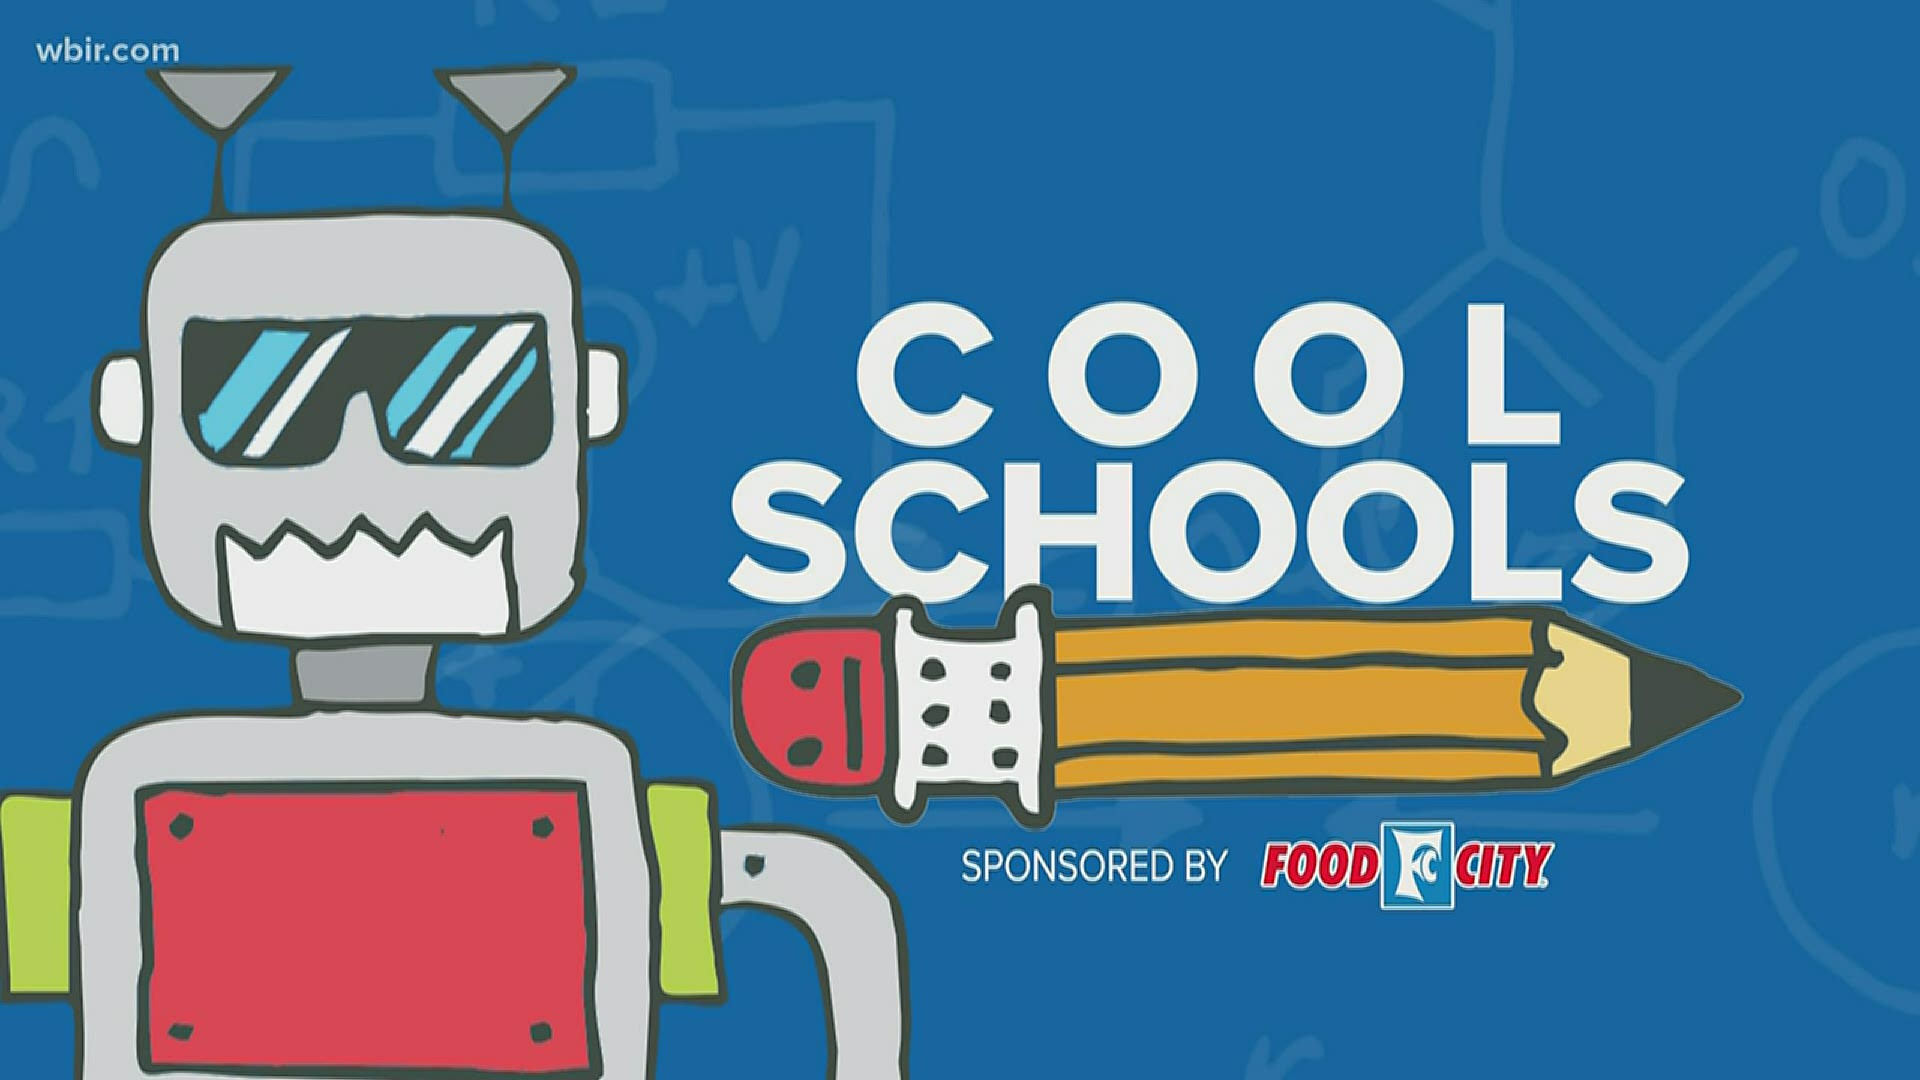 Even though school is out of session, we are celebrating cool schools all across East Tennessee.